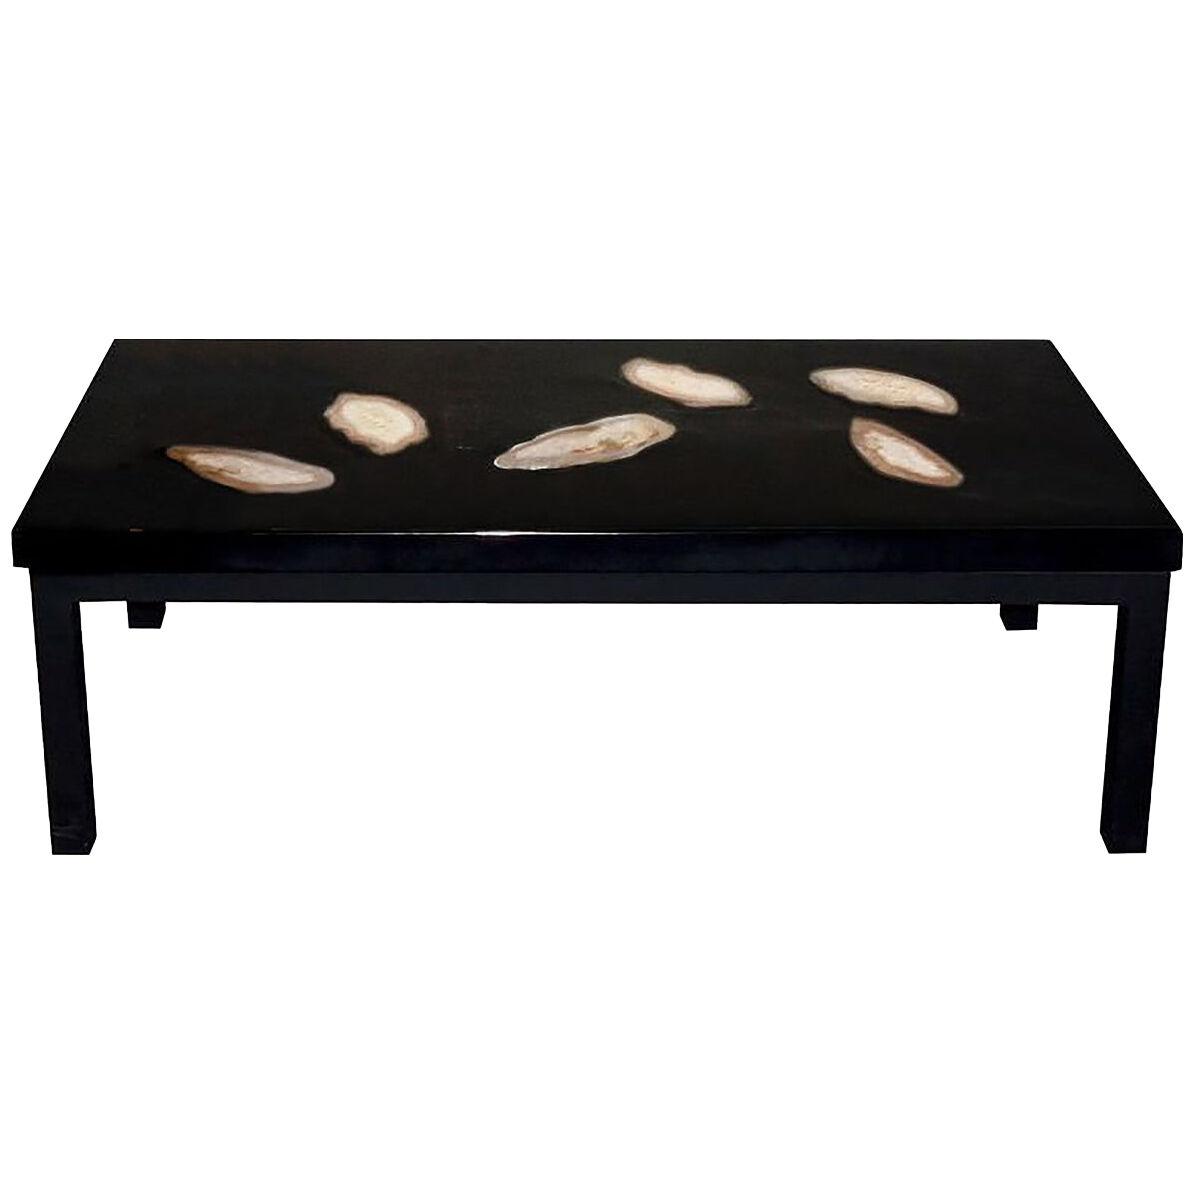 Signed Ado Chale Black Resin and Agate Coffee Table